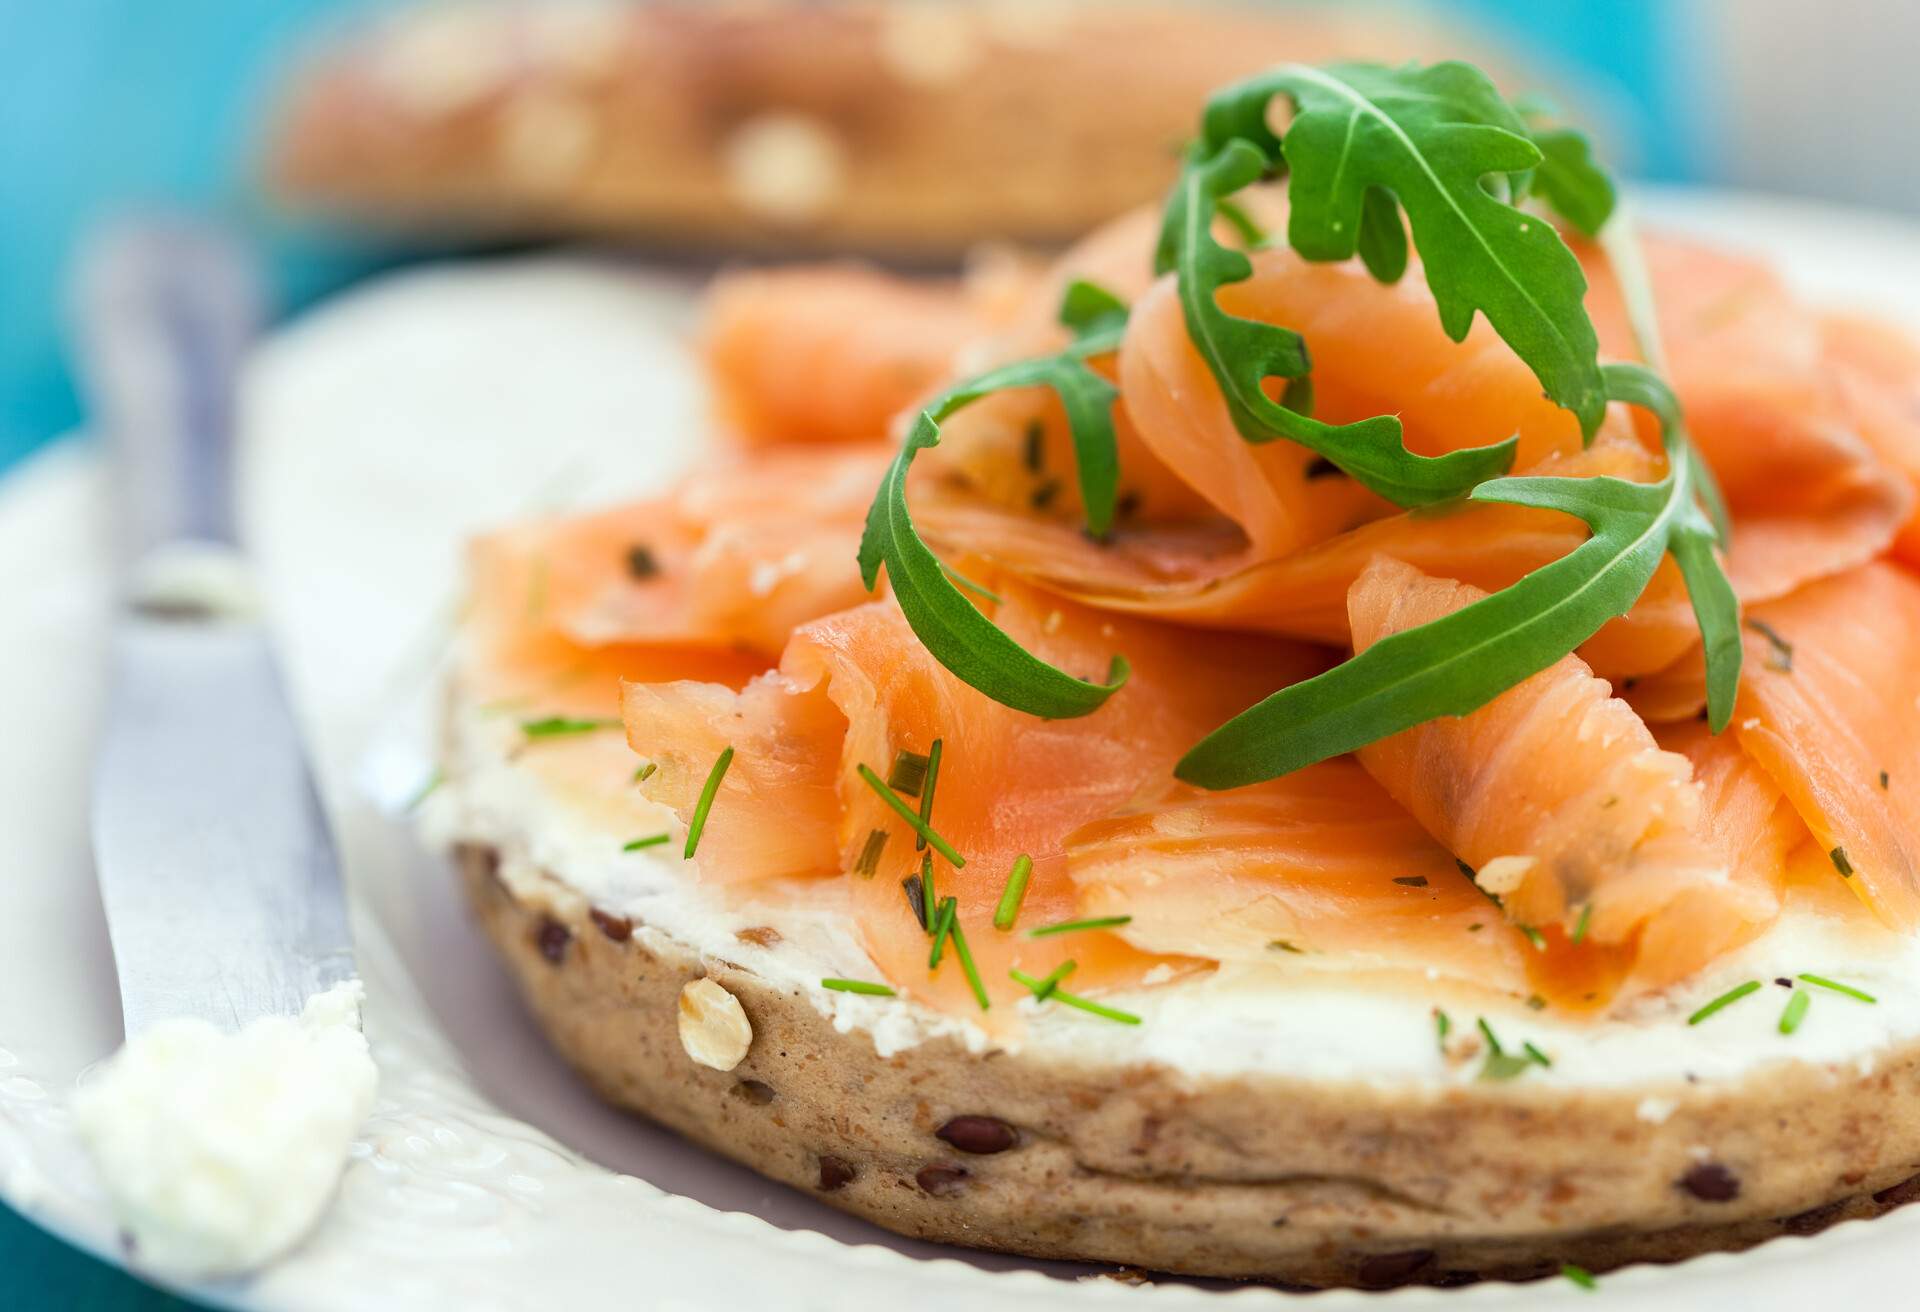 Smoked Salmon with cream cheese on a bagel